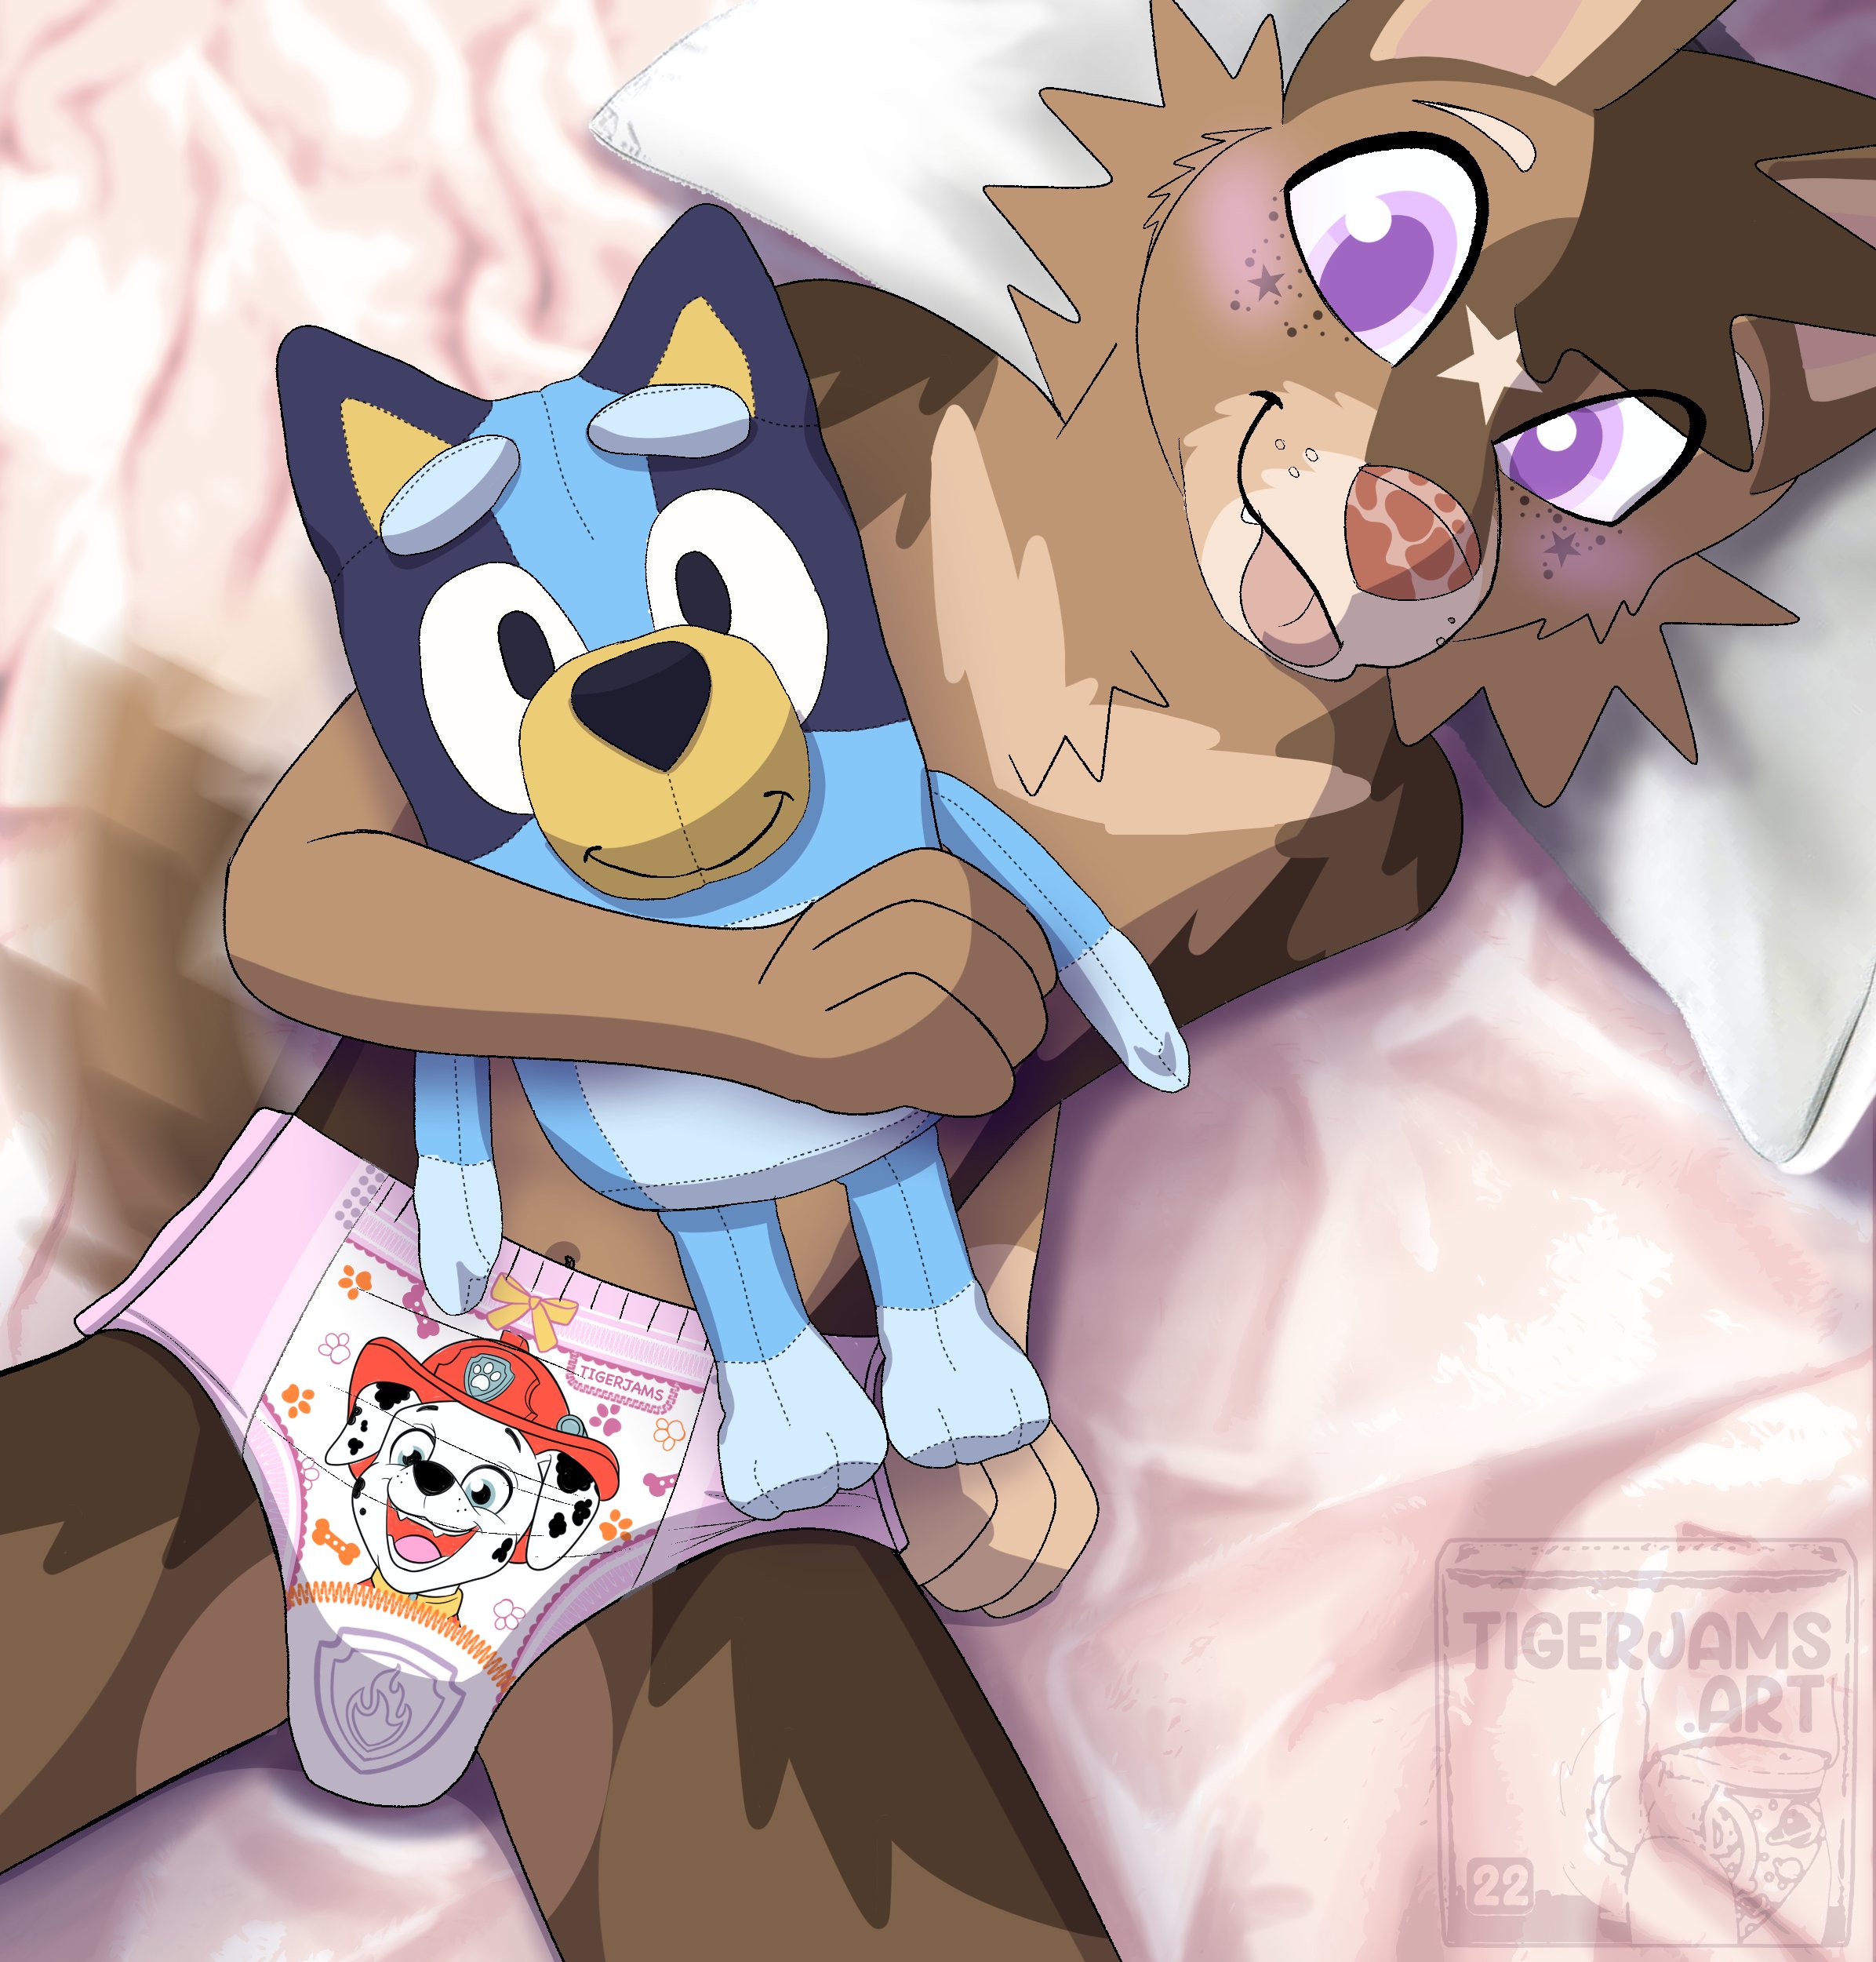 Tigerjams @ FCL FWA on X: It's bed time! All kiddos get ready for bed and  I'll put on an episode of Bluey! Two episodes if you're good~! @maxipupper  Is being such